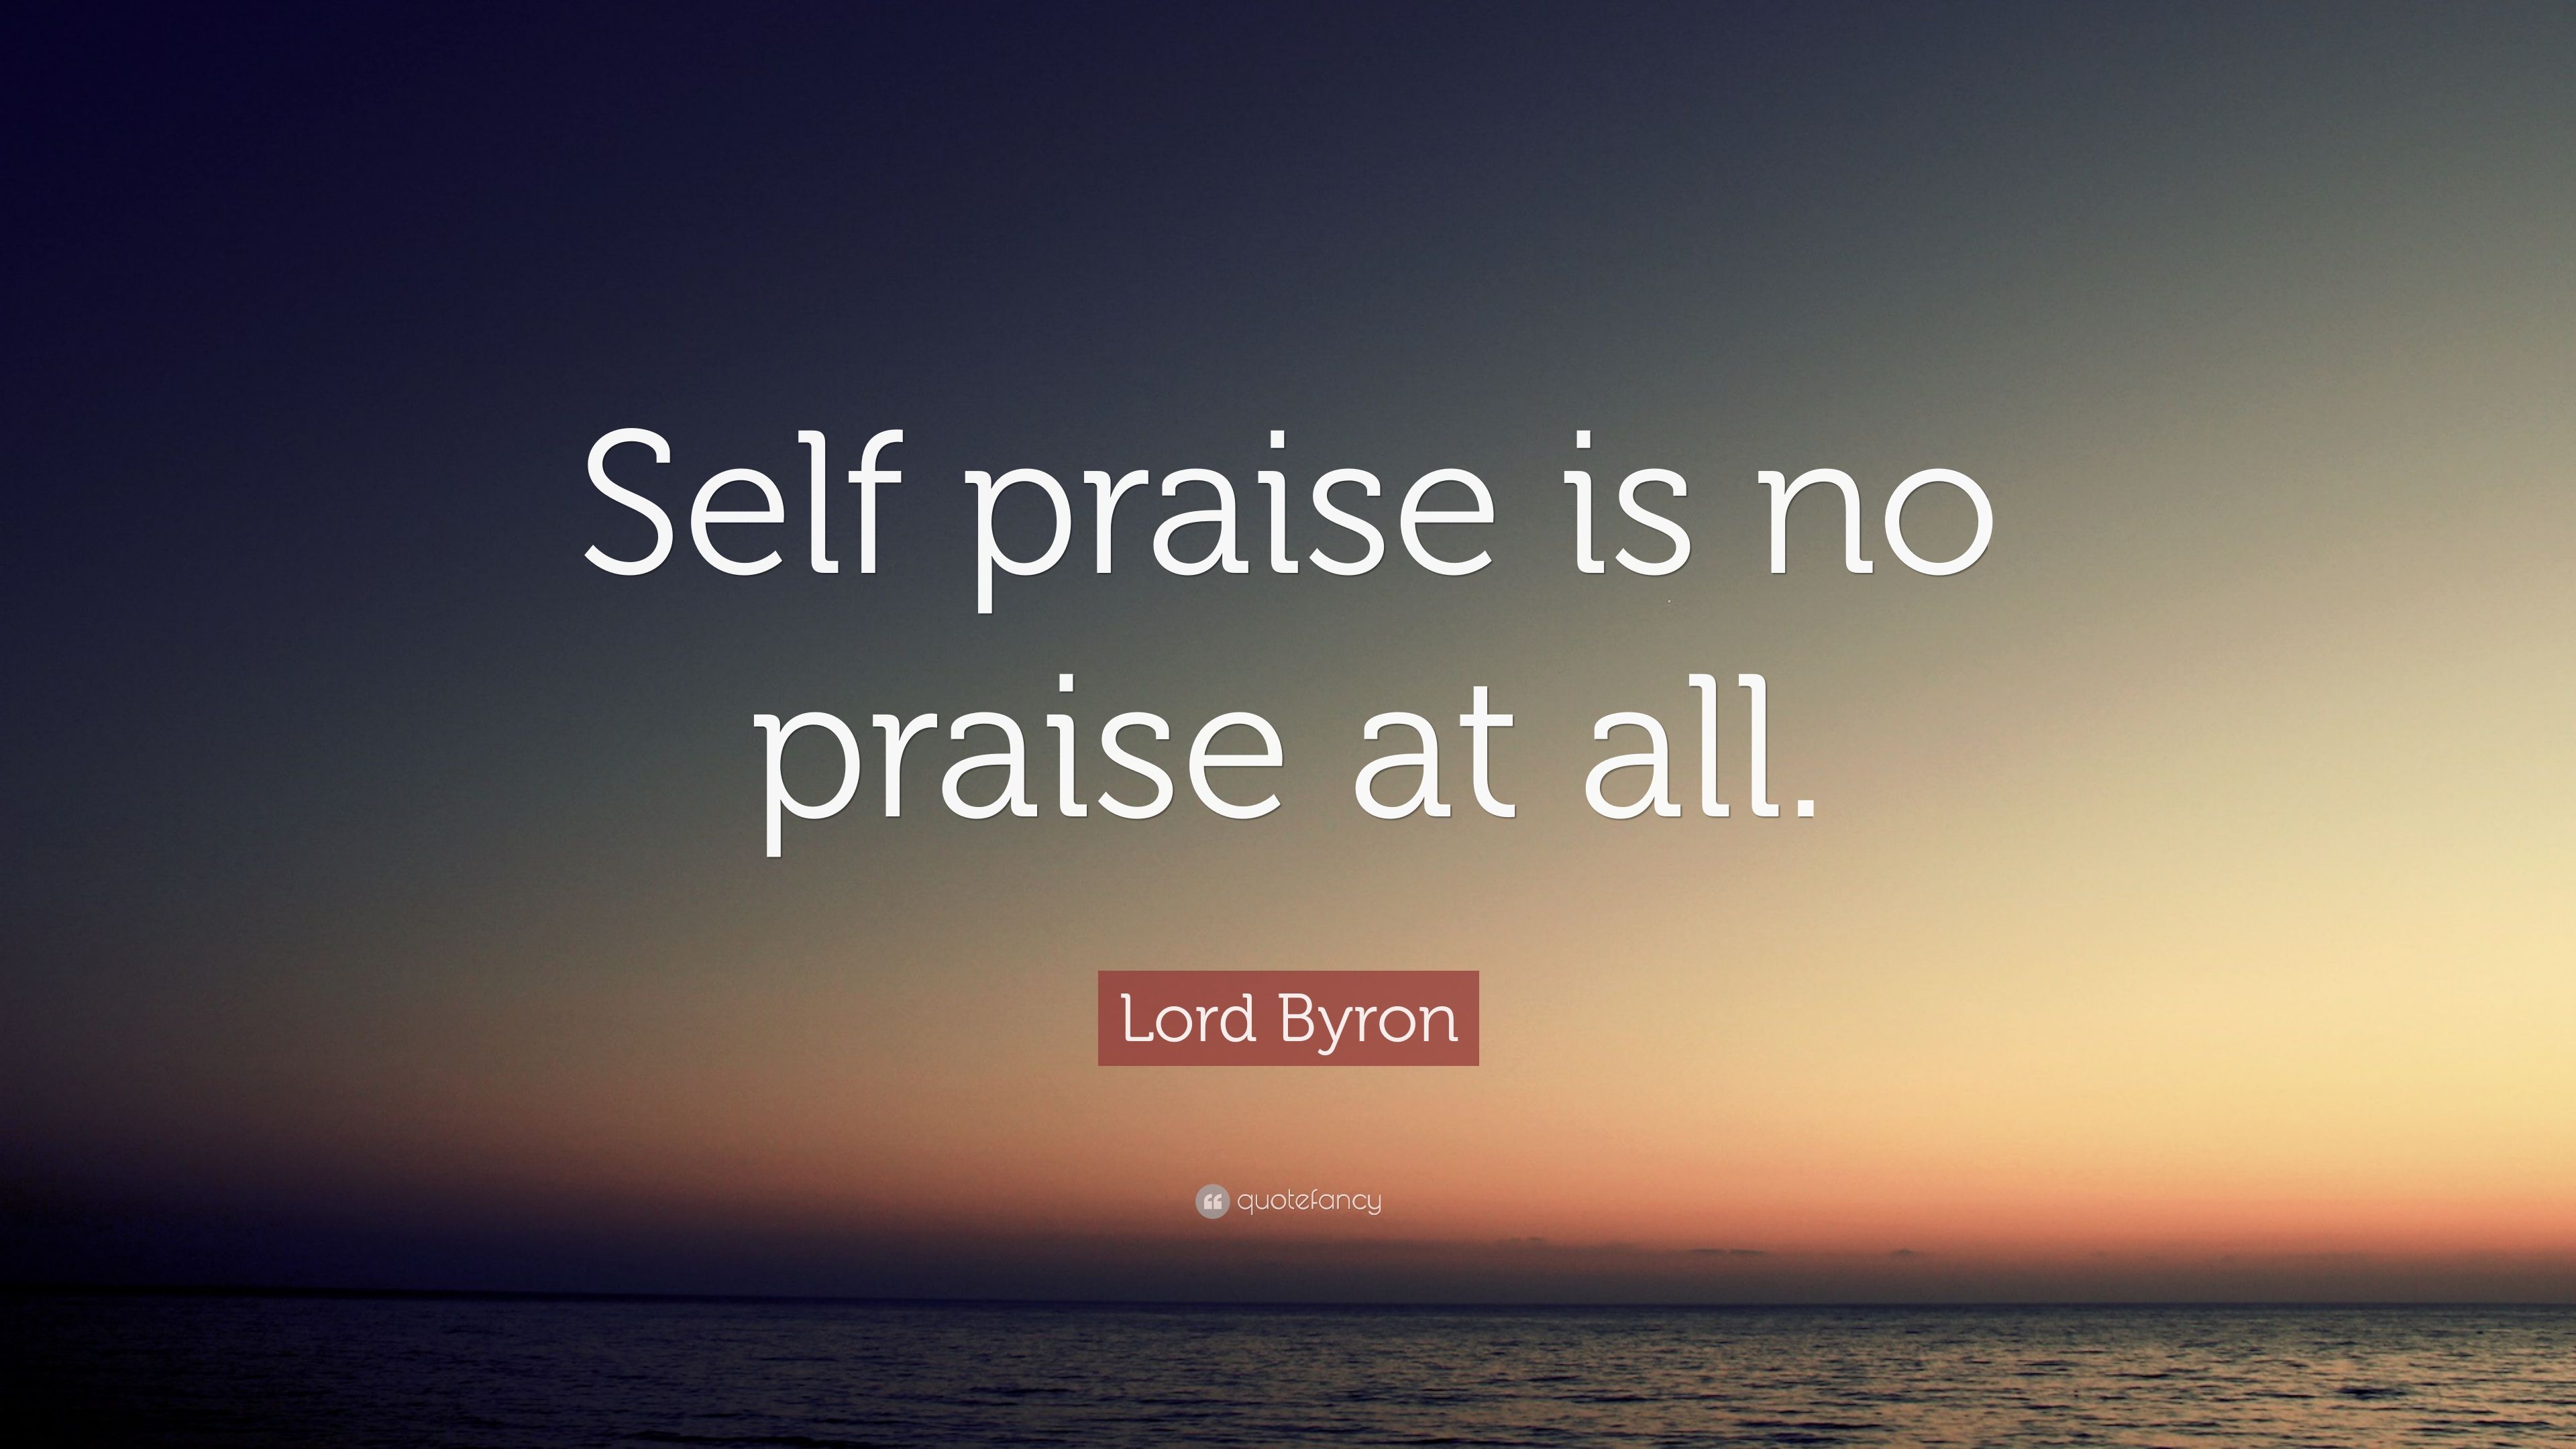 Lord Byron Quote: “Self praise is no praise at all.” 10